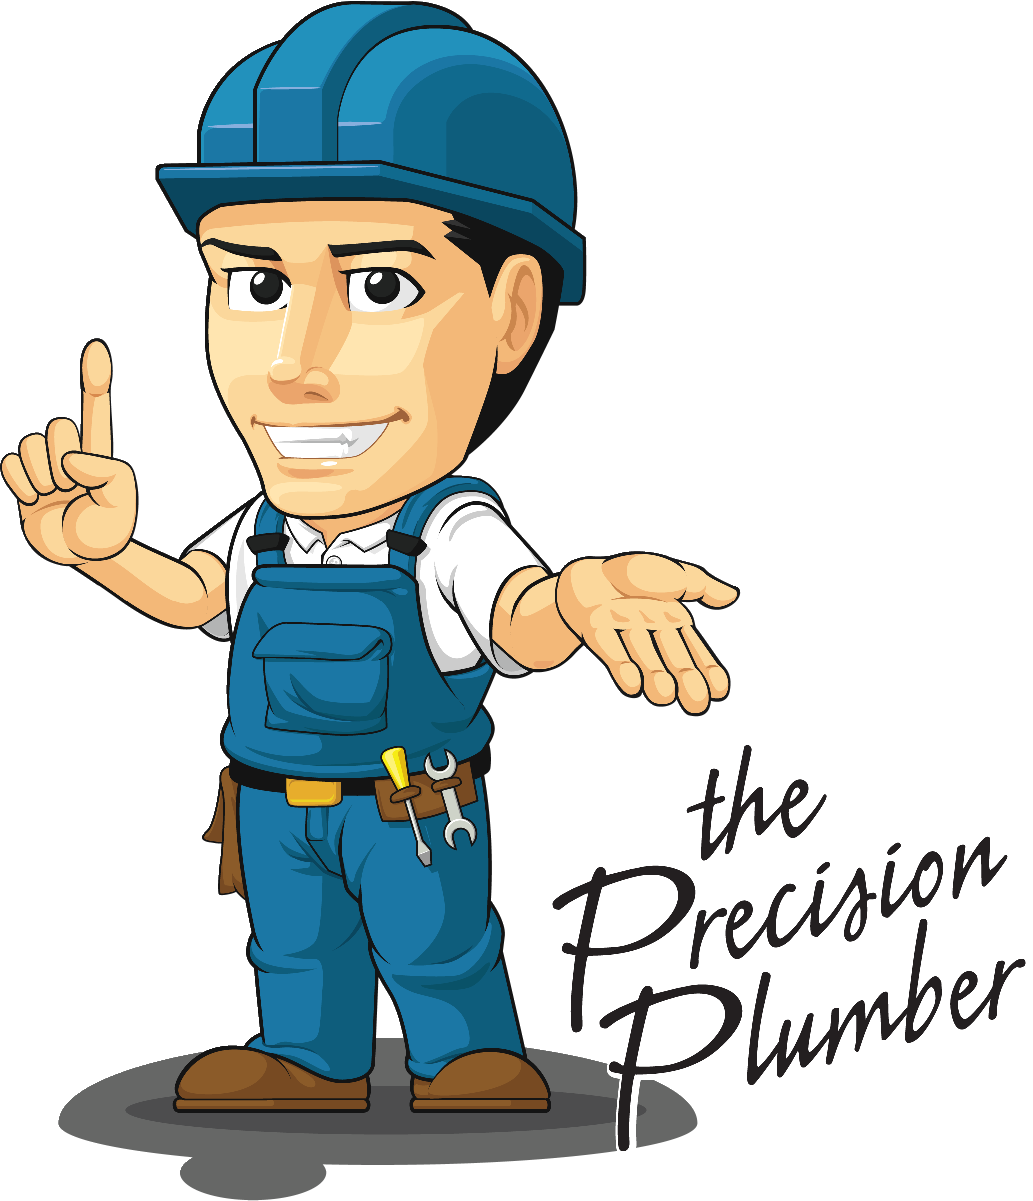 Plumber clipart plumbing service. Precision contracting services precisionplumbermascot